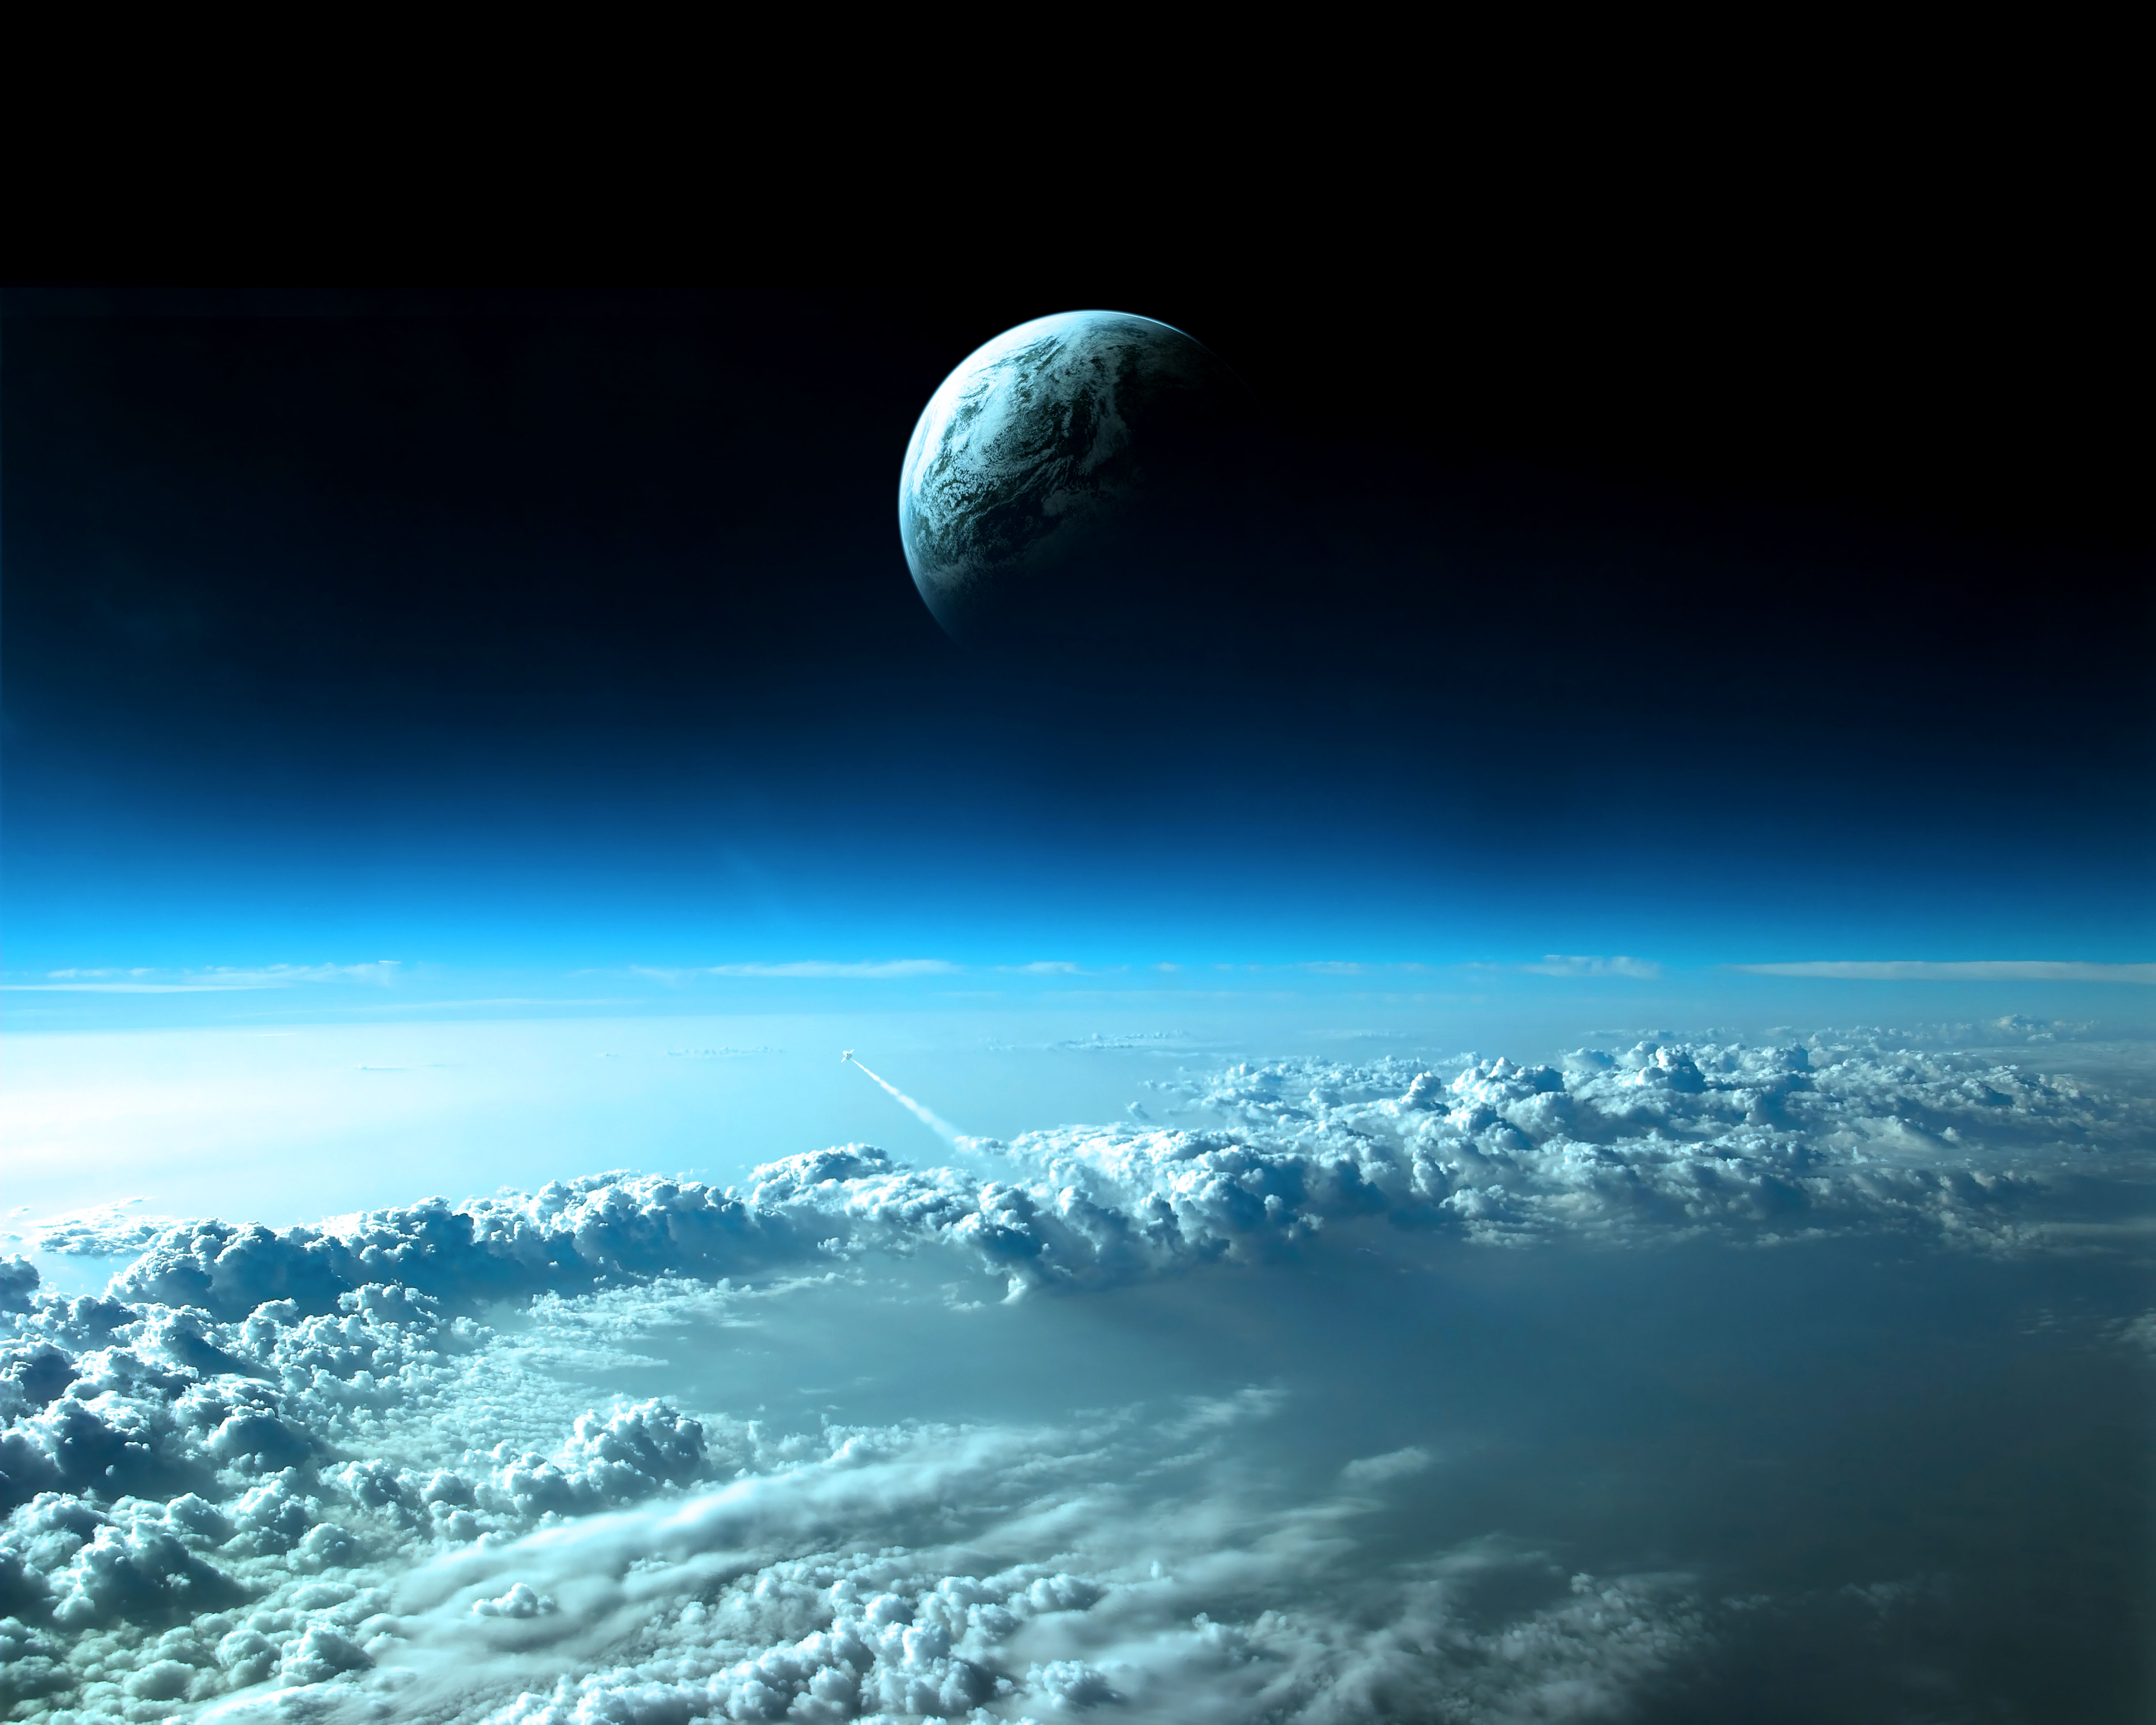 SpaceFantasy Wallpaper Set 13 Awesome Wallpapers